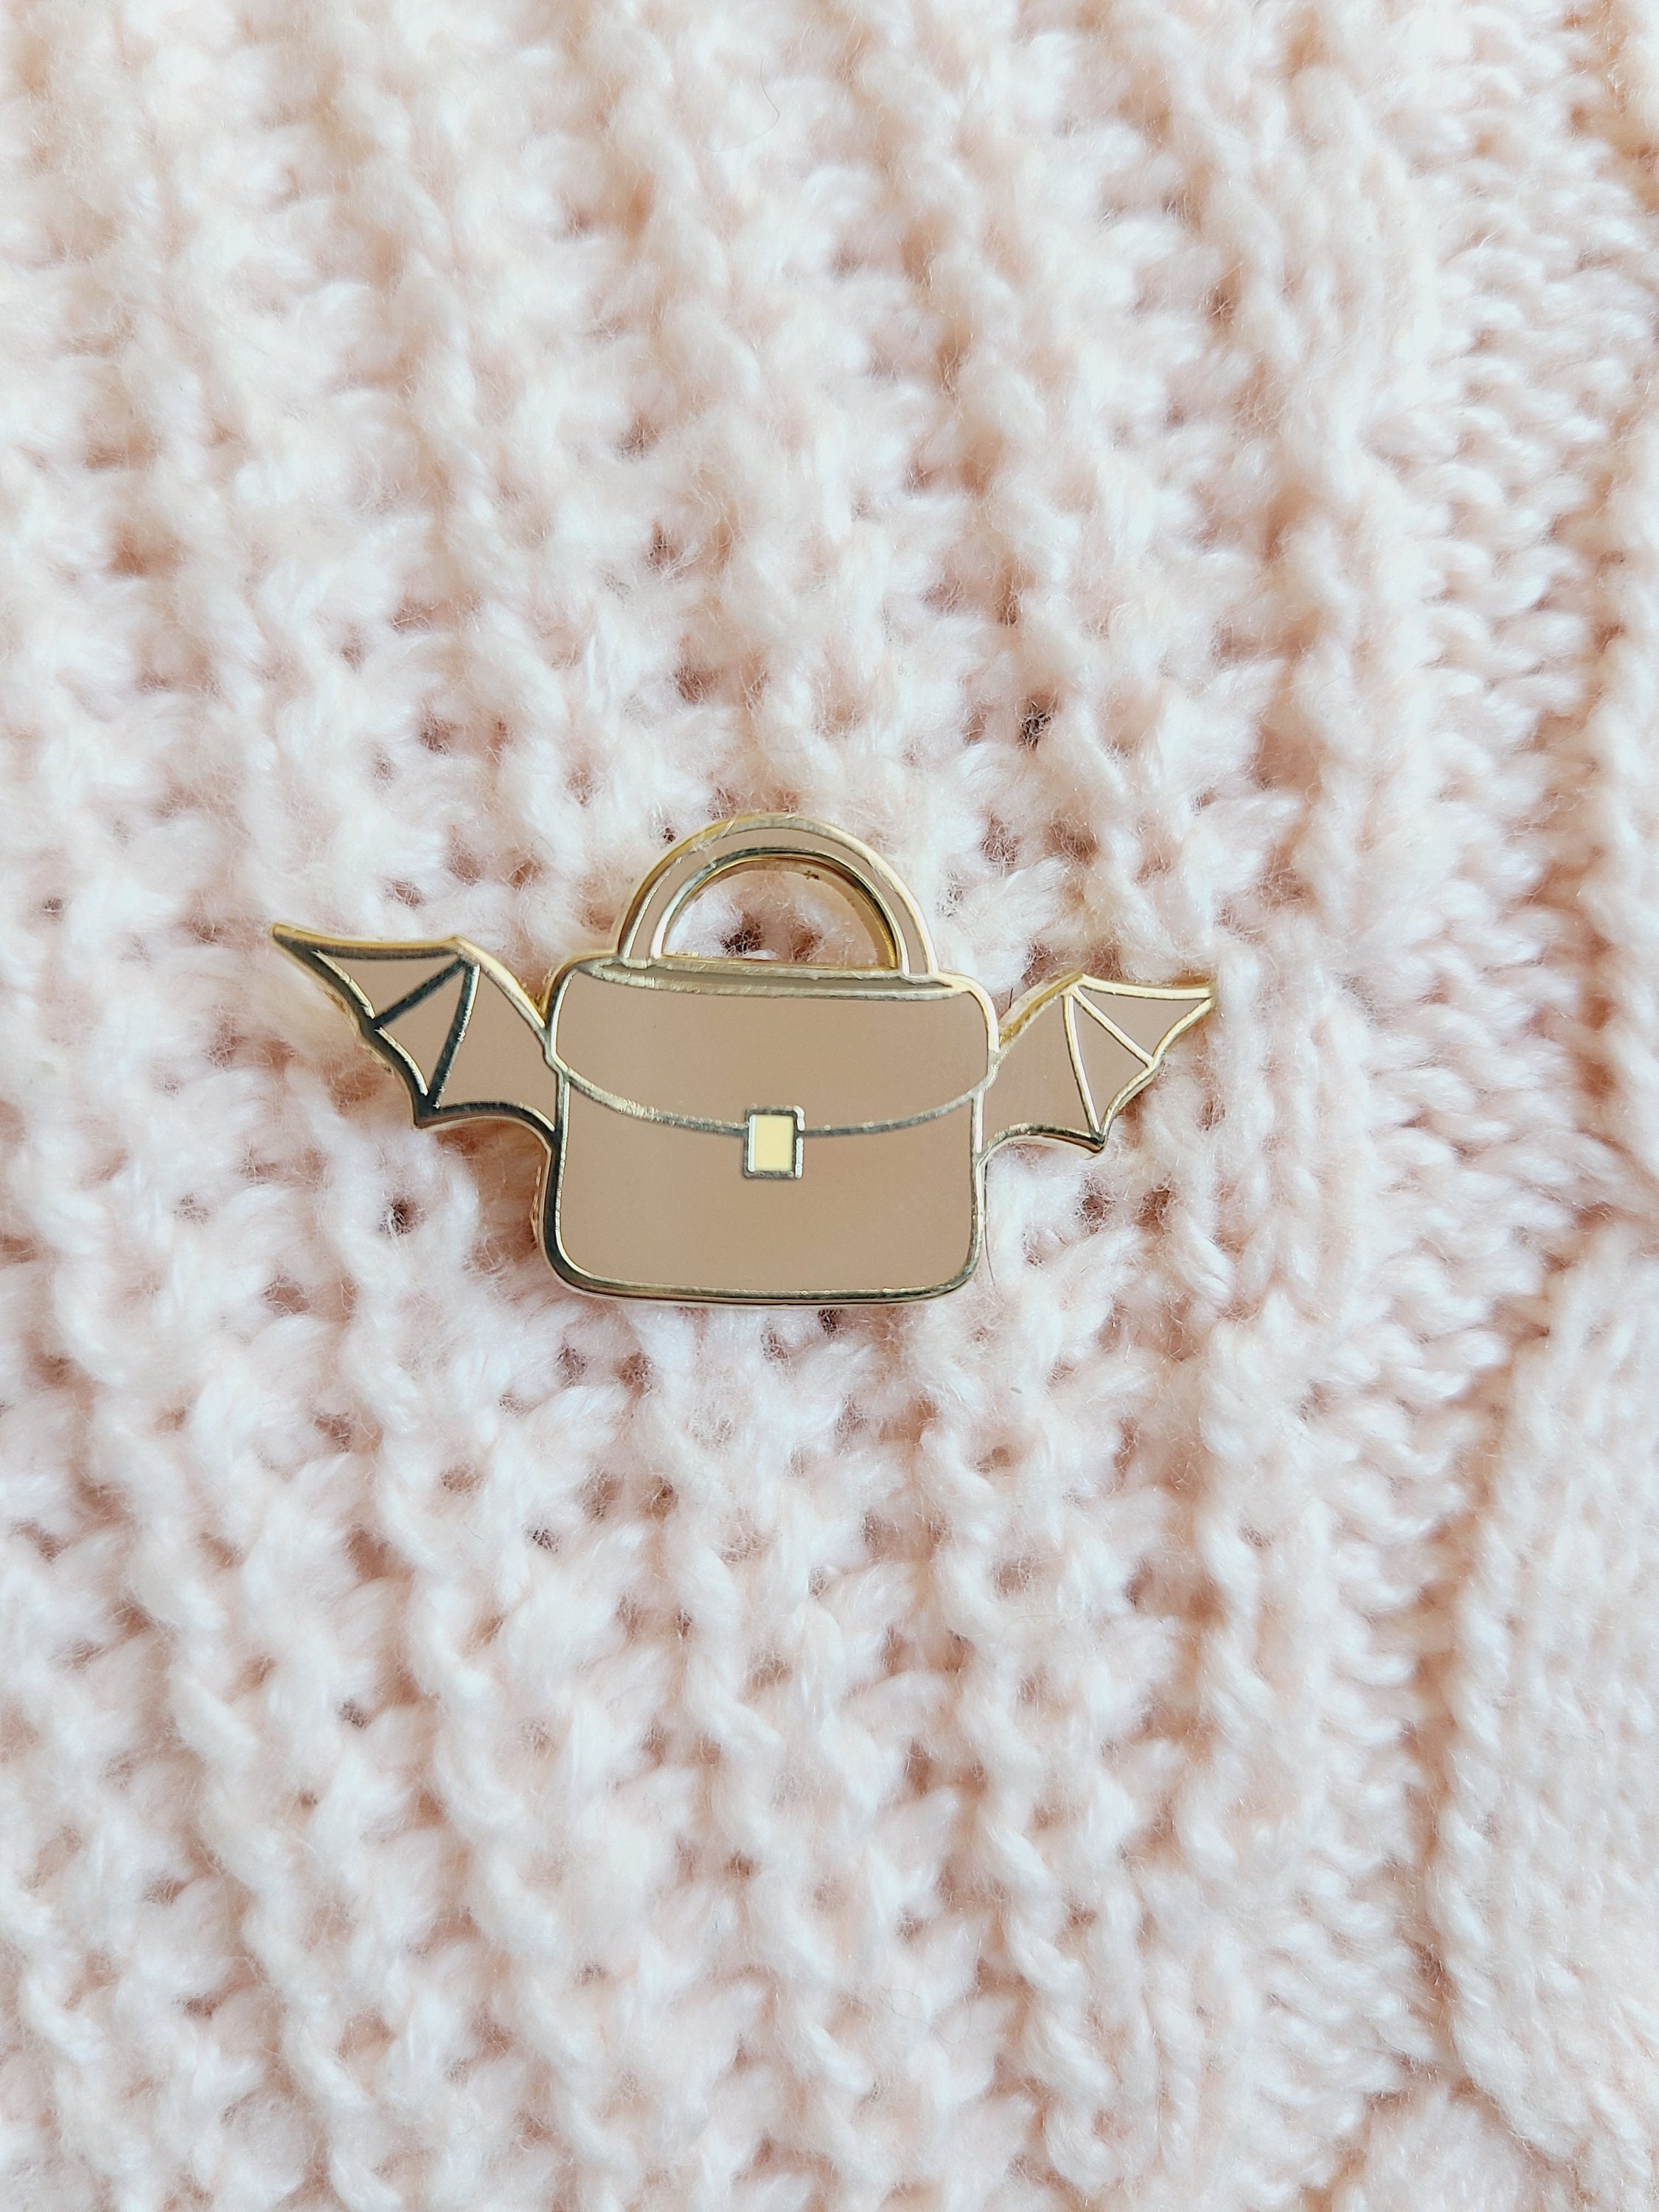 Pin on Accessories/purses